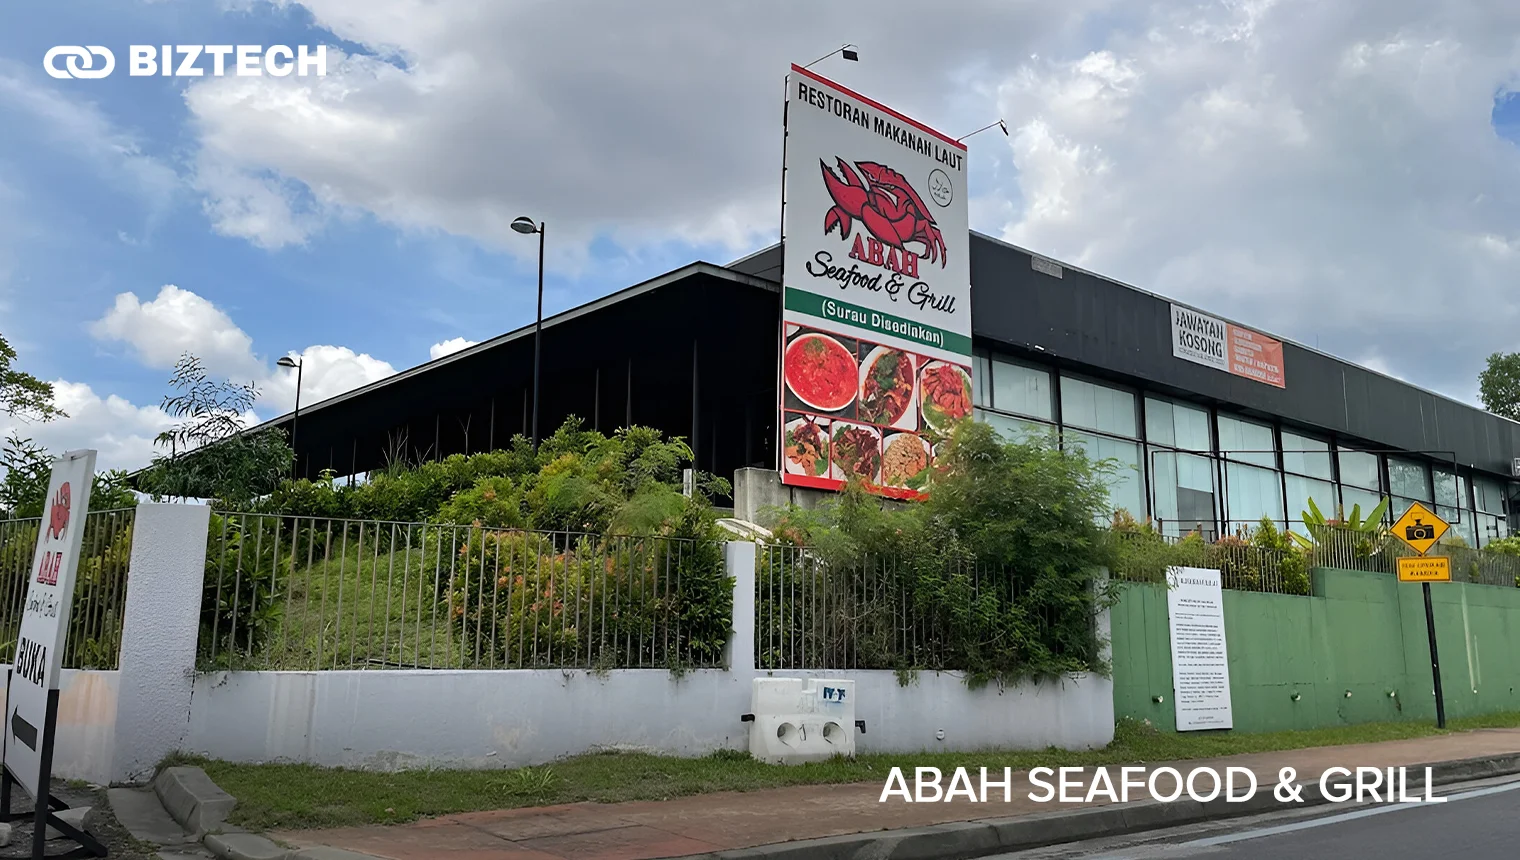 Abah Seafood & Grill